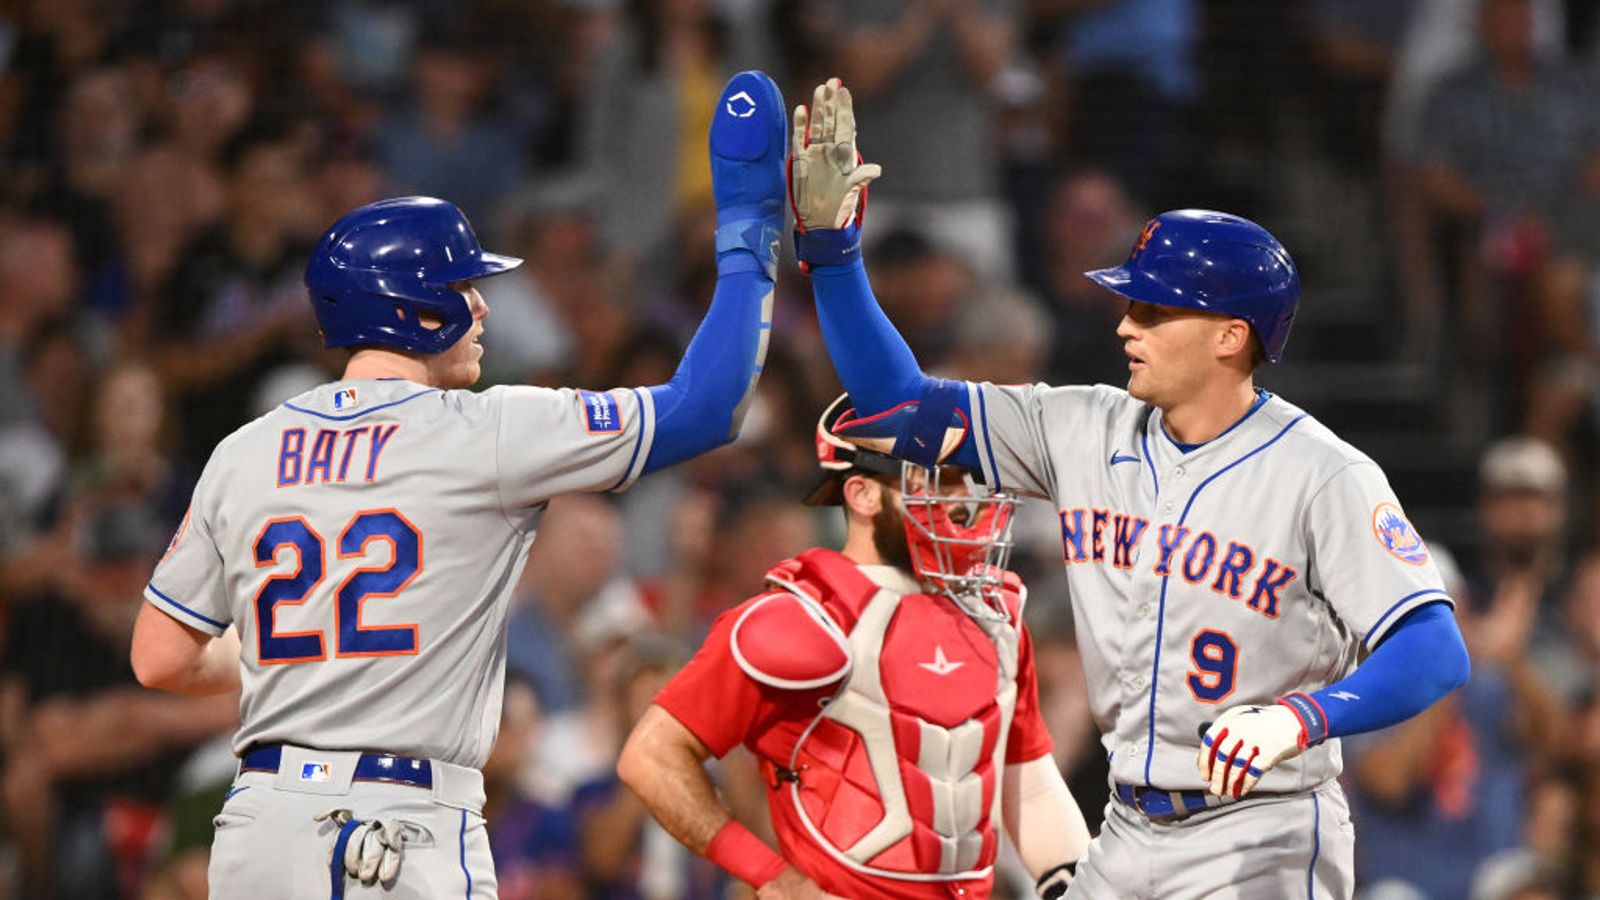 BSJ Live Coverage: Mets (45-51) at (Red Sox (51-46), 7:10 p.m. - Sox open  home stand against the Mets